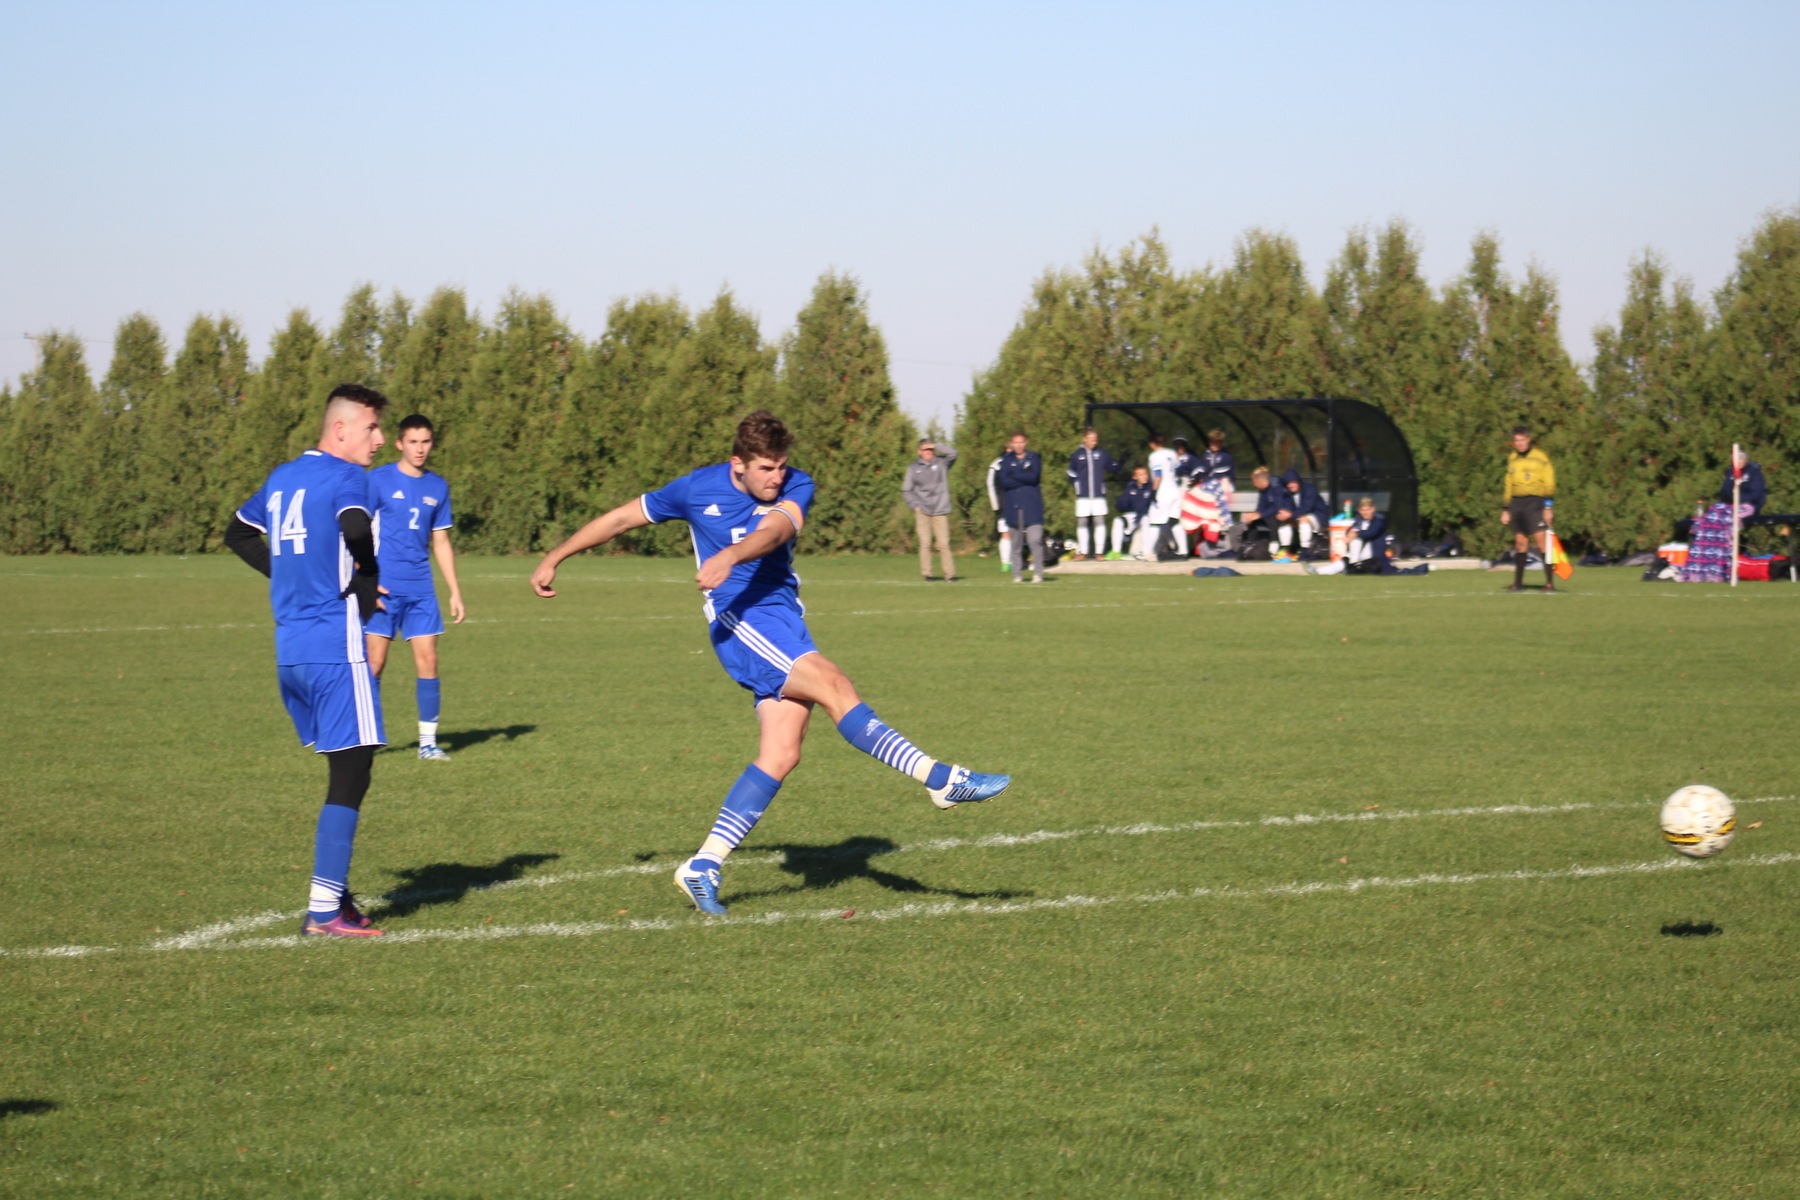 Niall Coulthard scores NIACC's goal on an indirect kick in the second half.